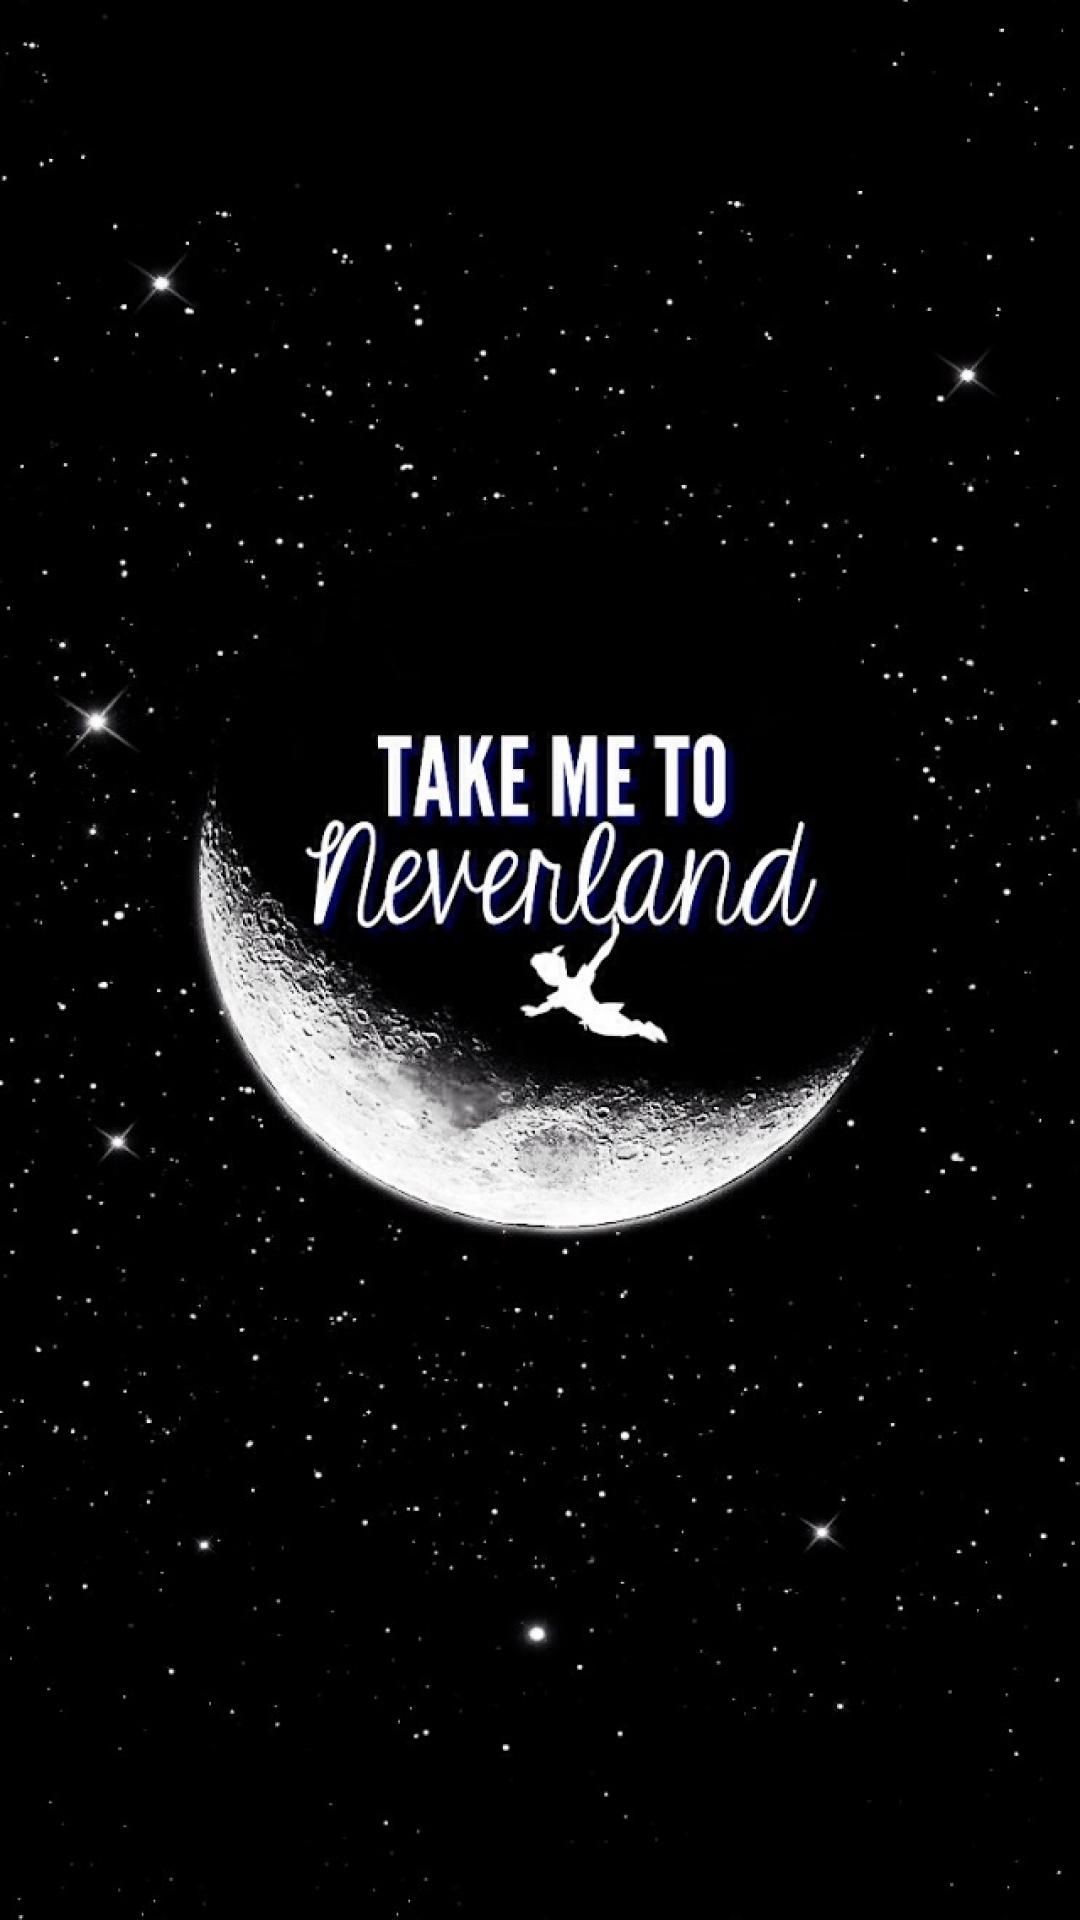 1080x1920 Take me to #neverland! #iPhoneQuotes